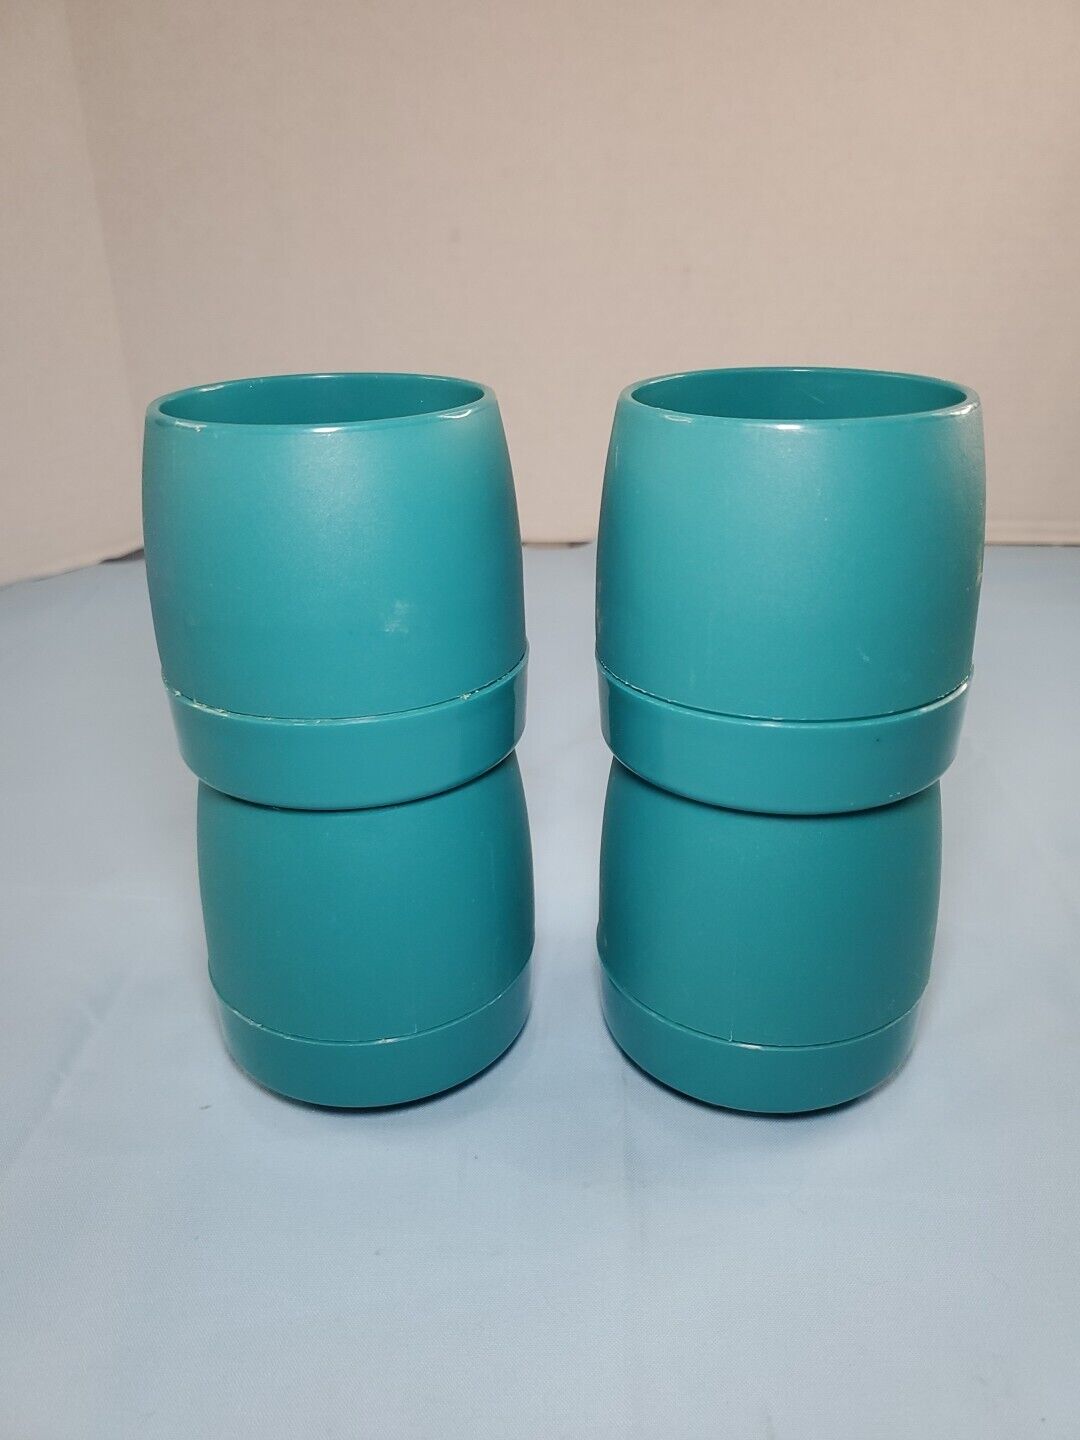 4 Vintage Dinex Insulated Camping Cup #1197 Teal Plastic Mugs / Cups made in USA